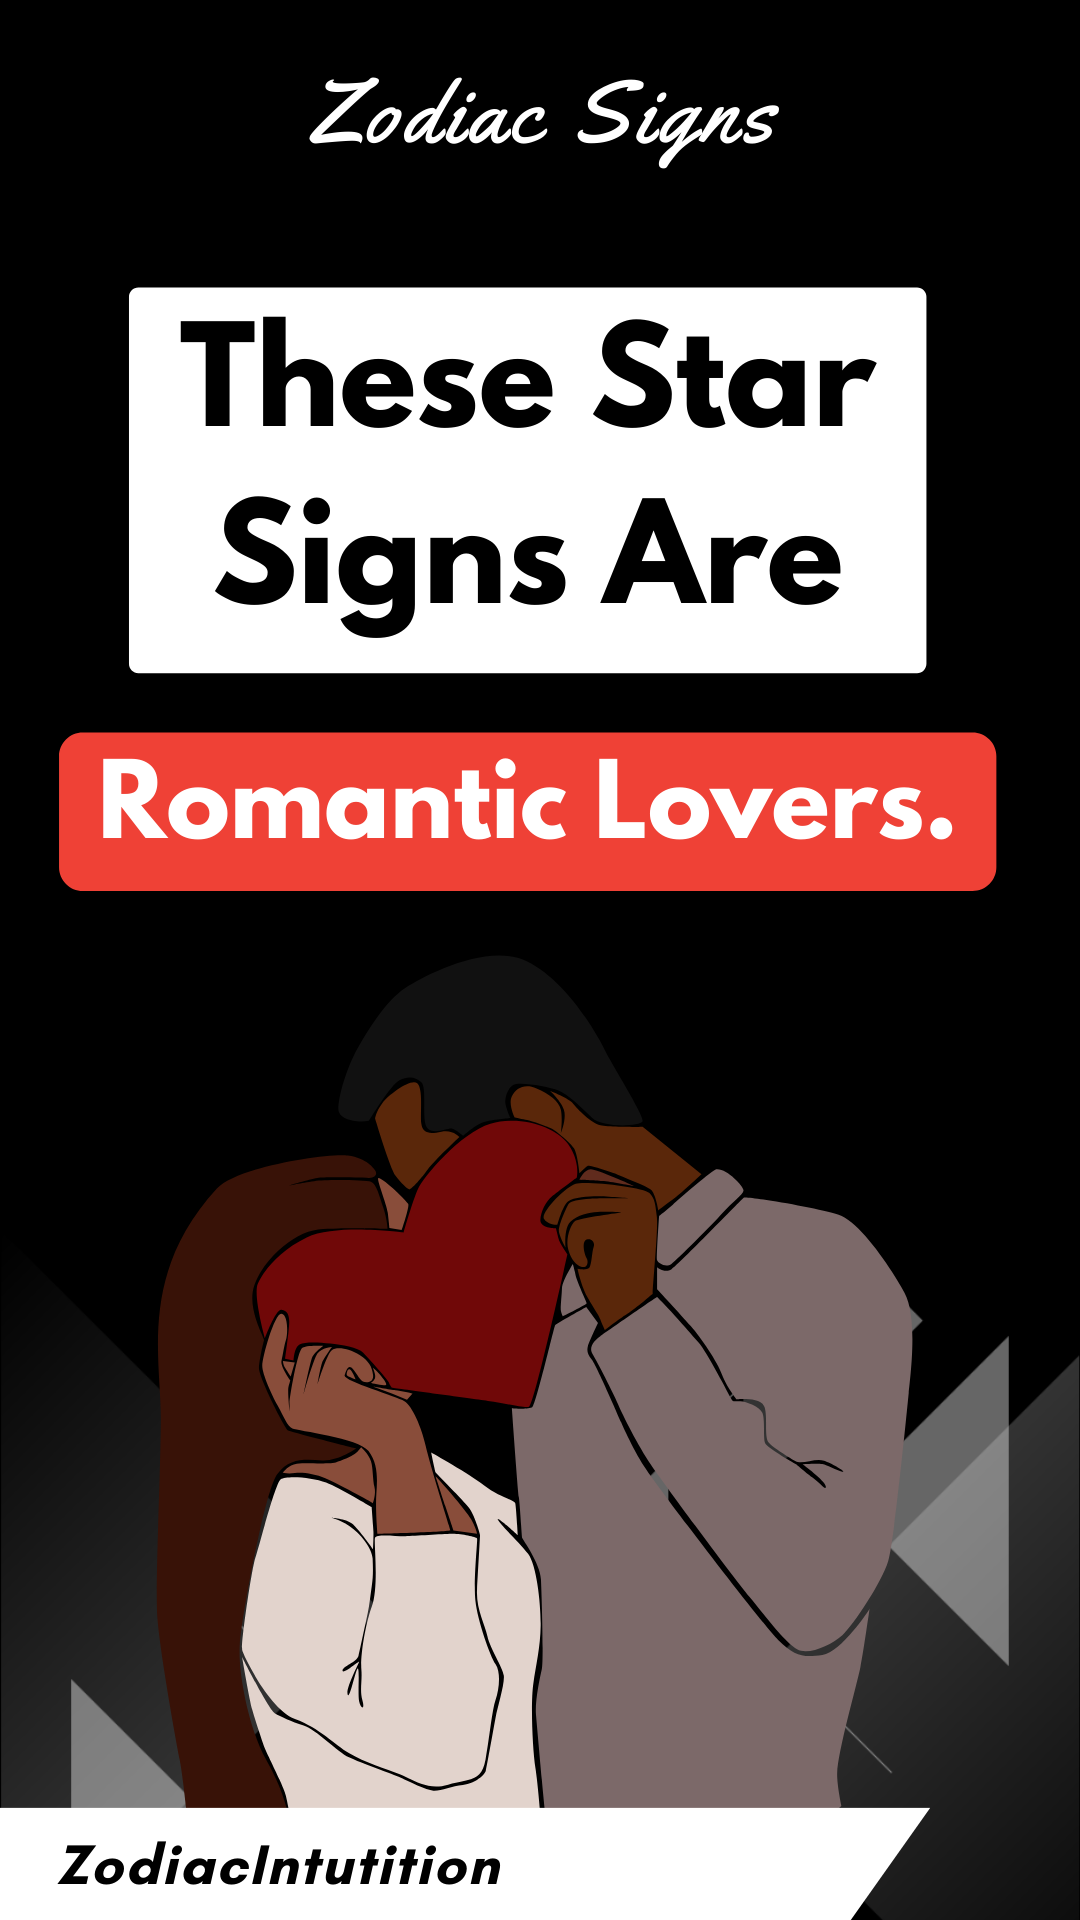 These Star Signs Are Romantic Lovers.